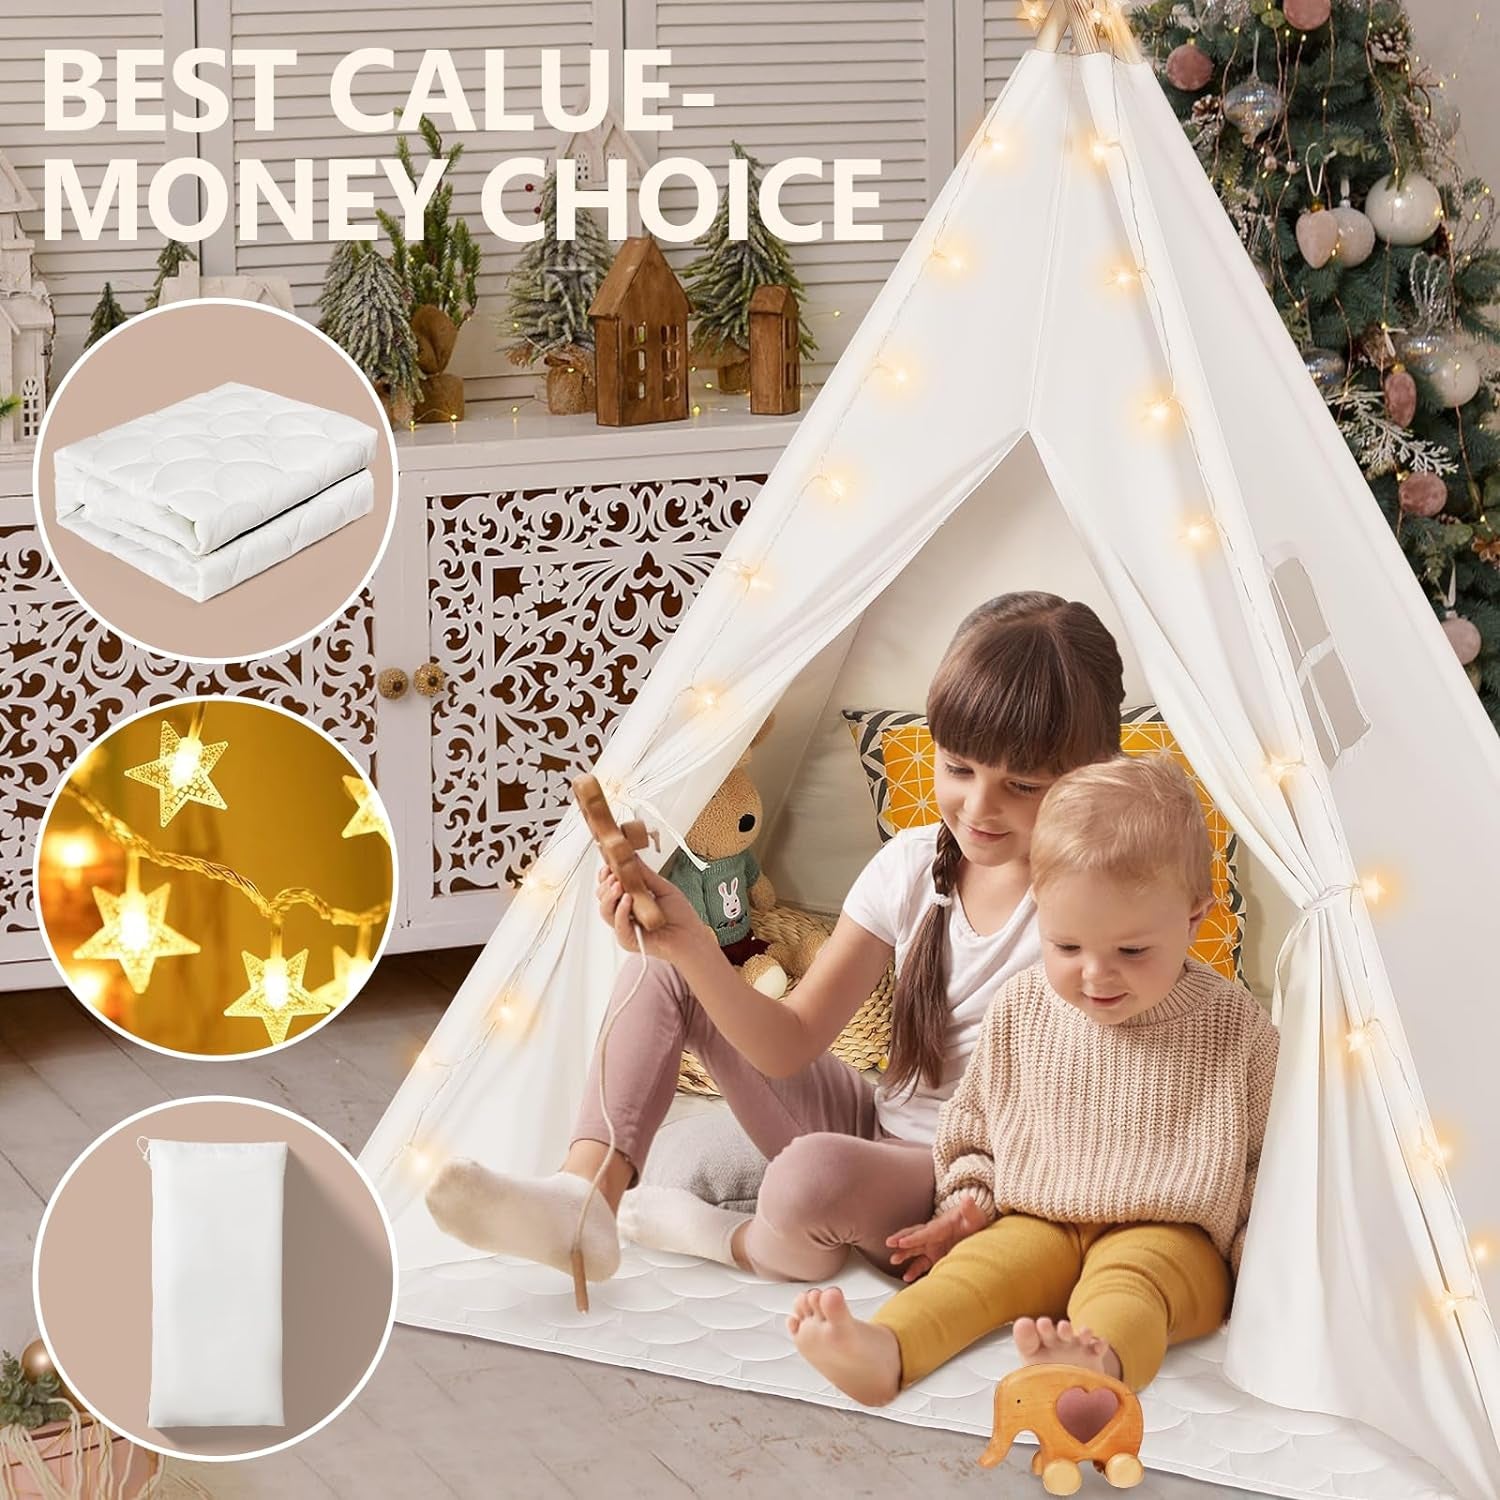 Teepee Tent for Kids with Carry Case, Natural Canvas Teepee Play Tent, Toys for Girls/Boys Indoor &amp; Outdoor Playing (White Teepee Tent)